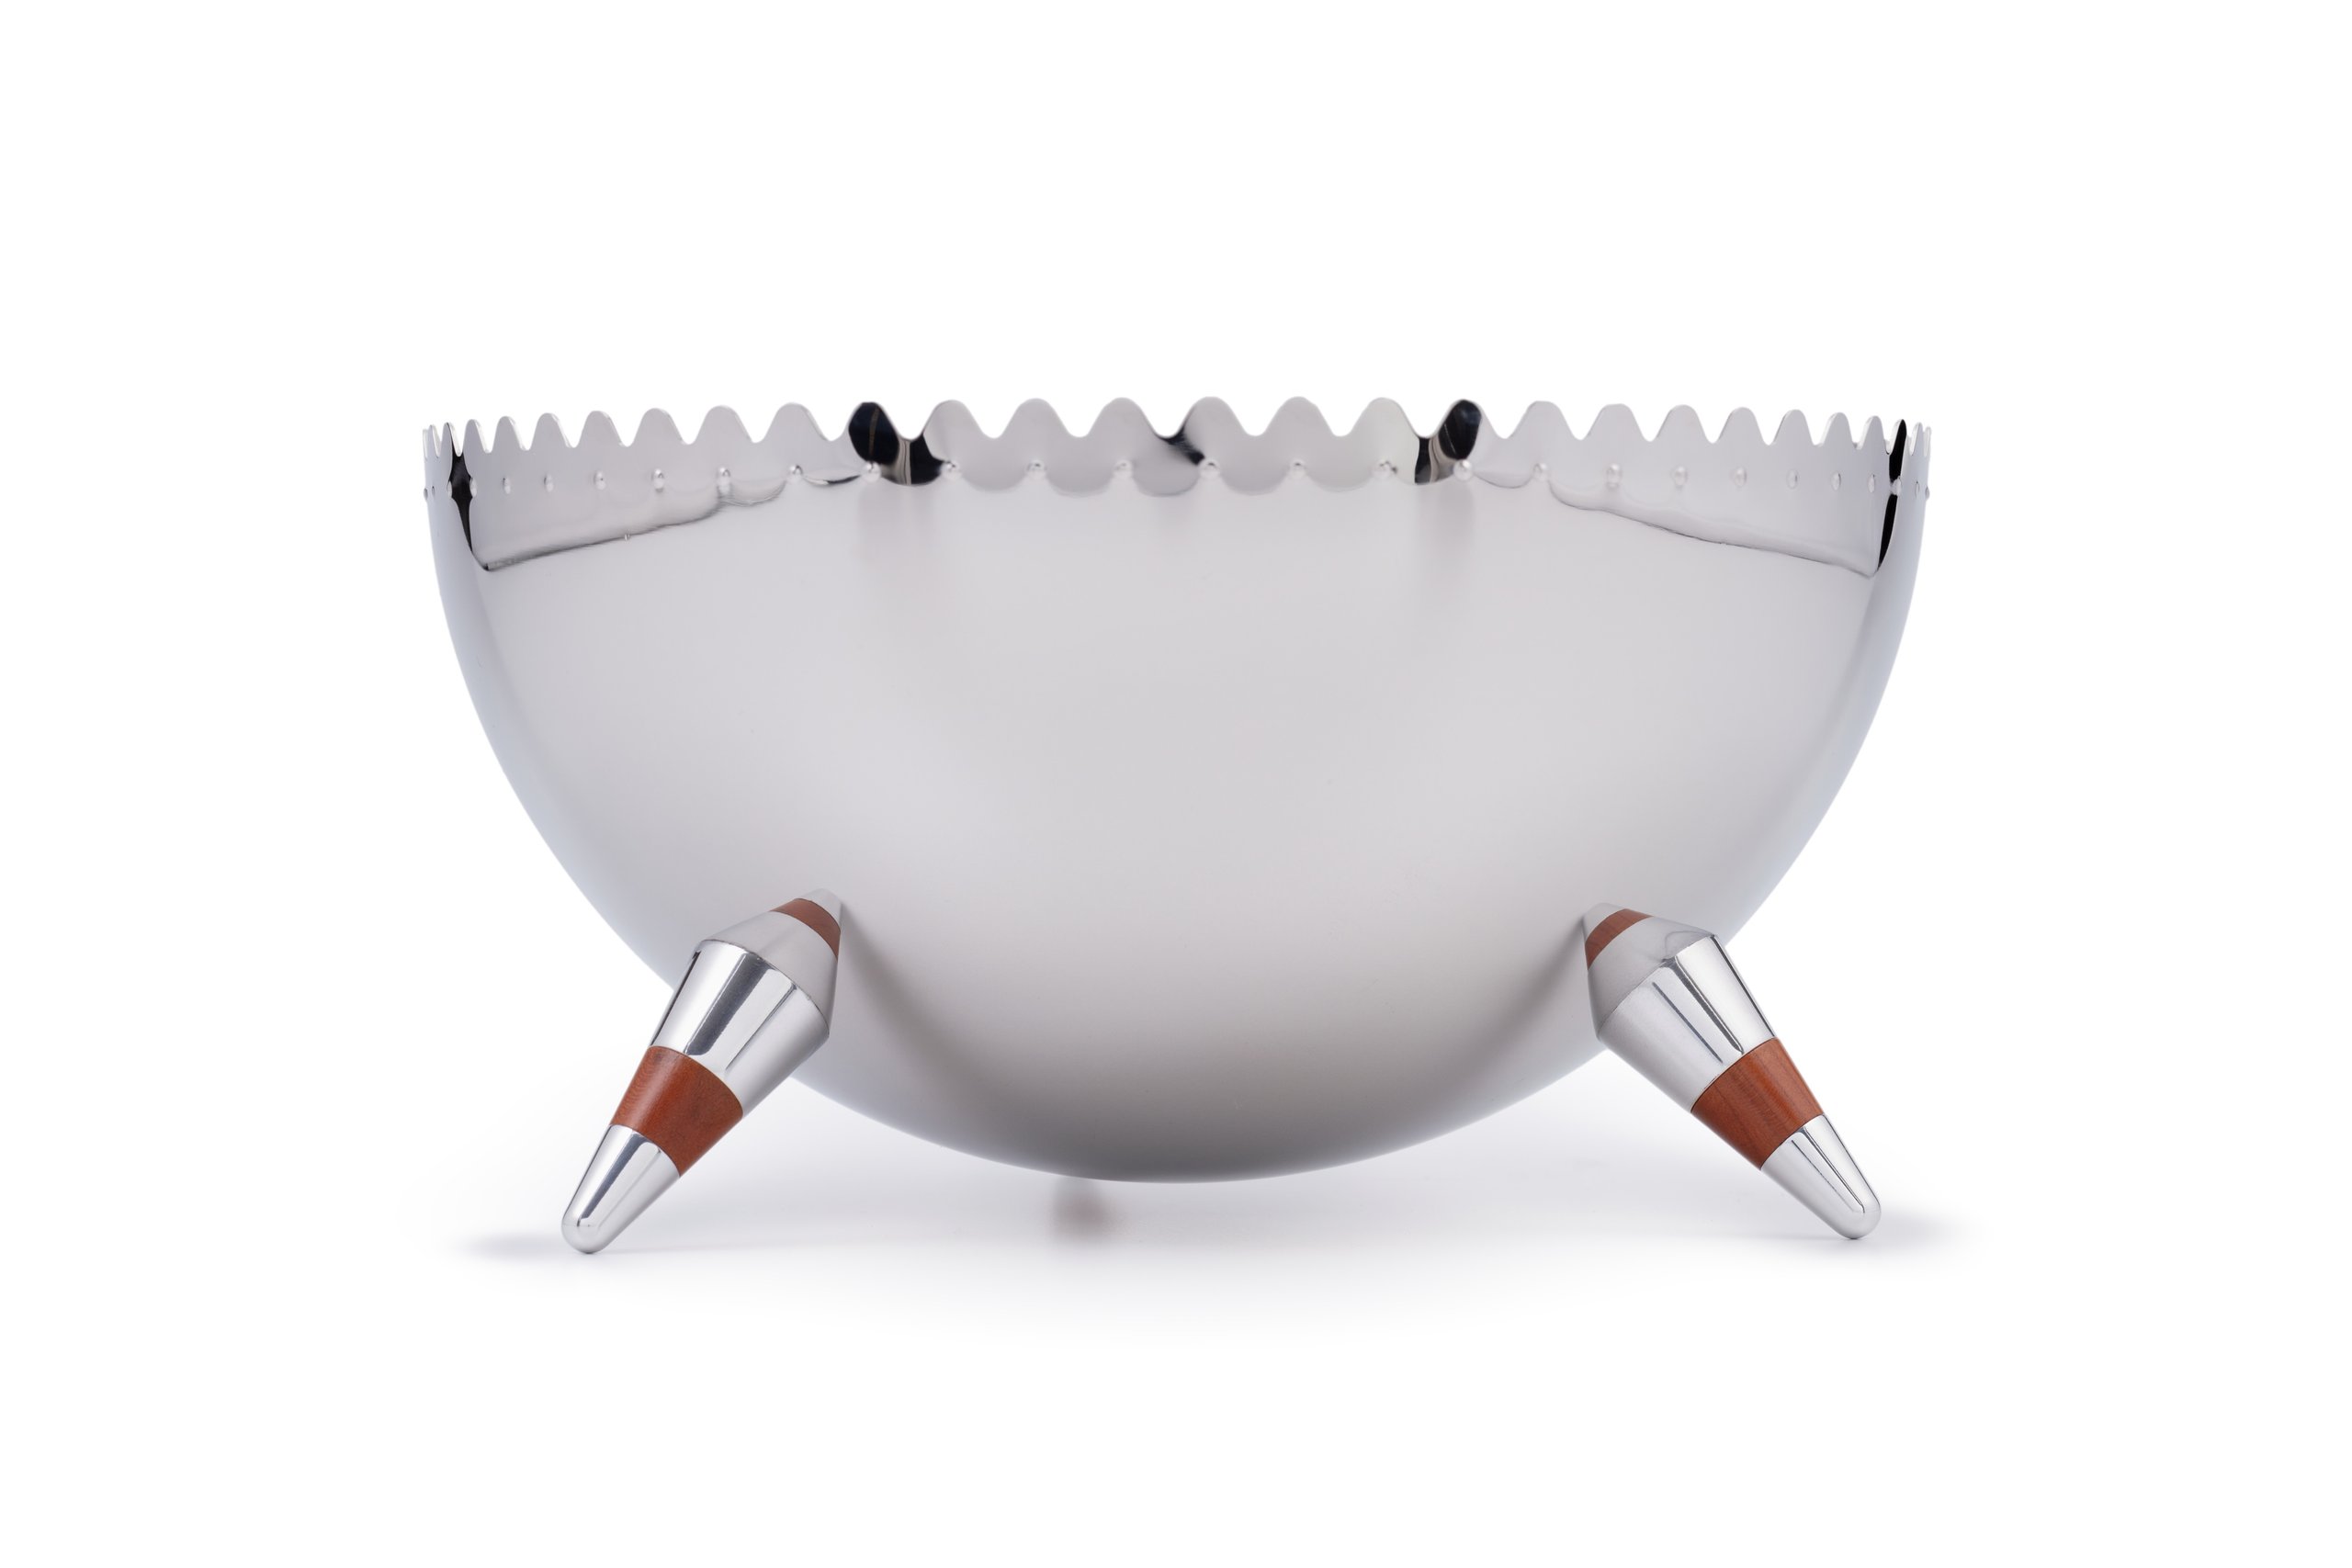 'Chimu' bowl by Joanna Lyle for Alessi